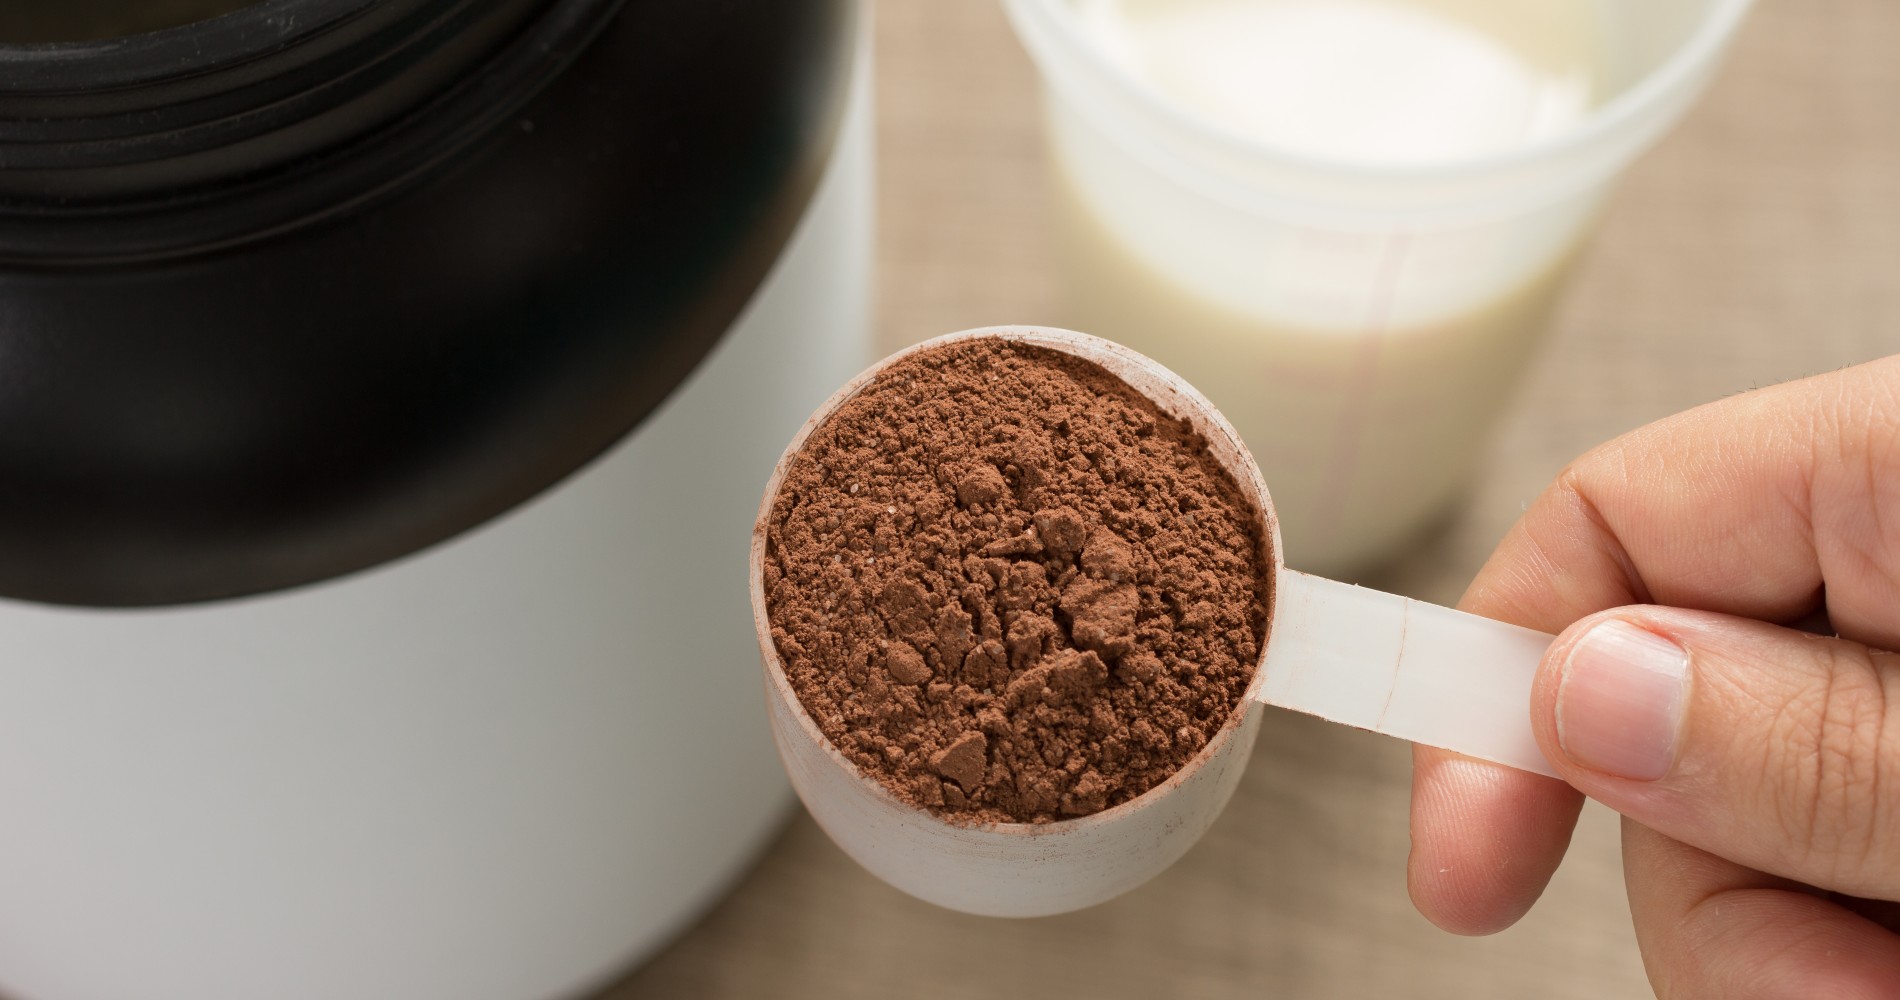 Dry scooping protein powders is the latest trend on TikTok - here's why  it's so dangerous